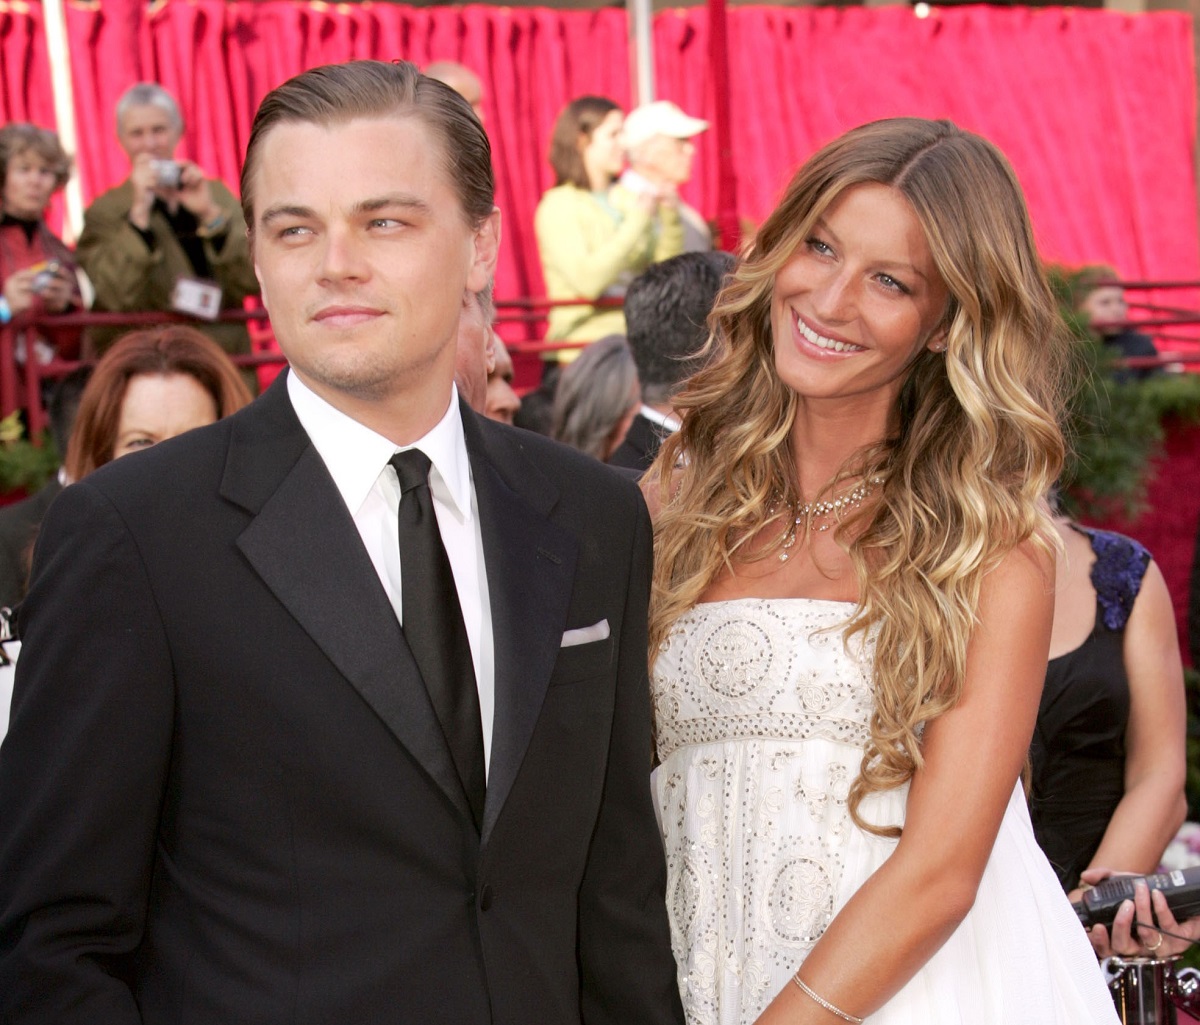 Leonardo DiCaprio and Gisele Bundchen smiling on the red carpet at the 77th Annual Academy Awards